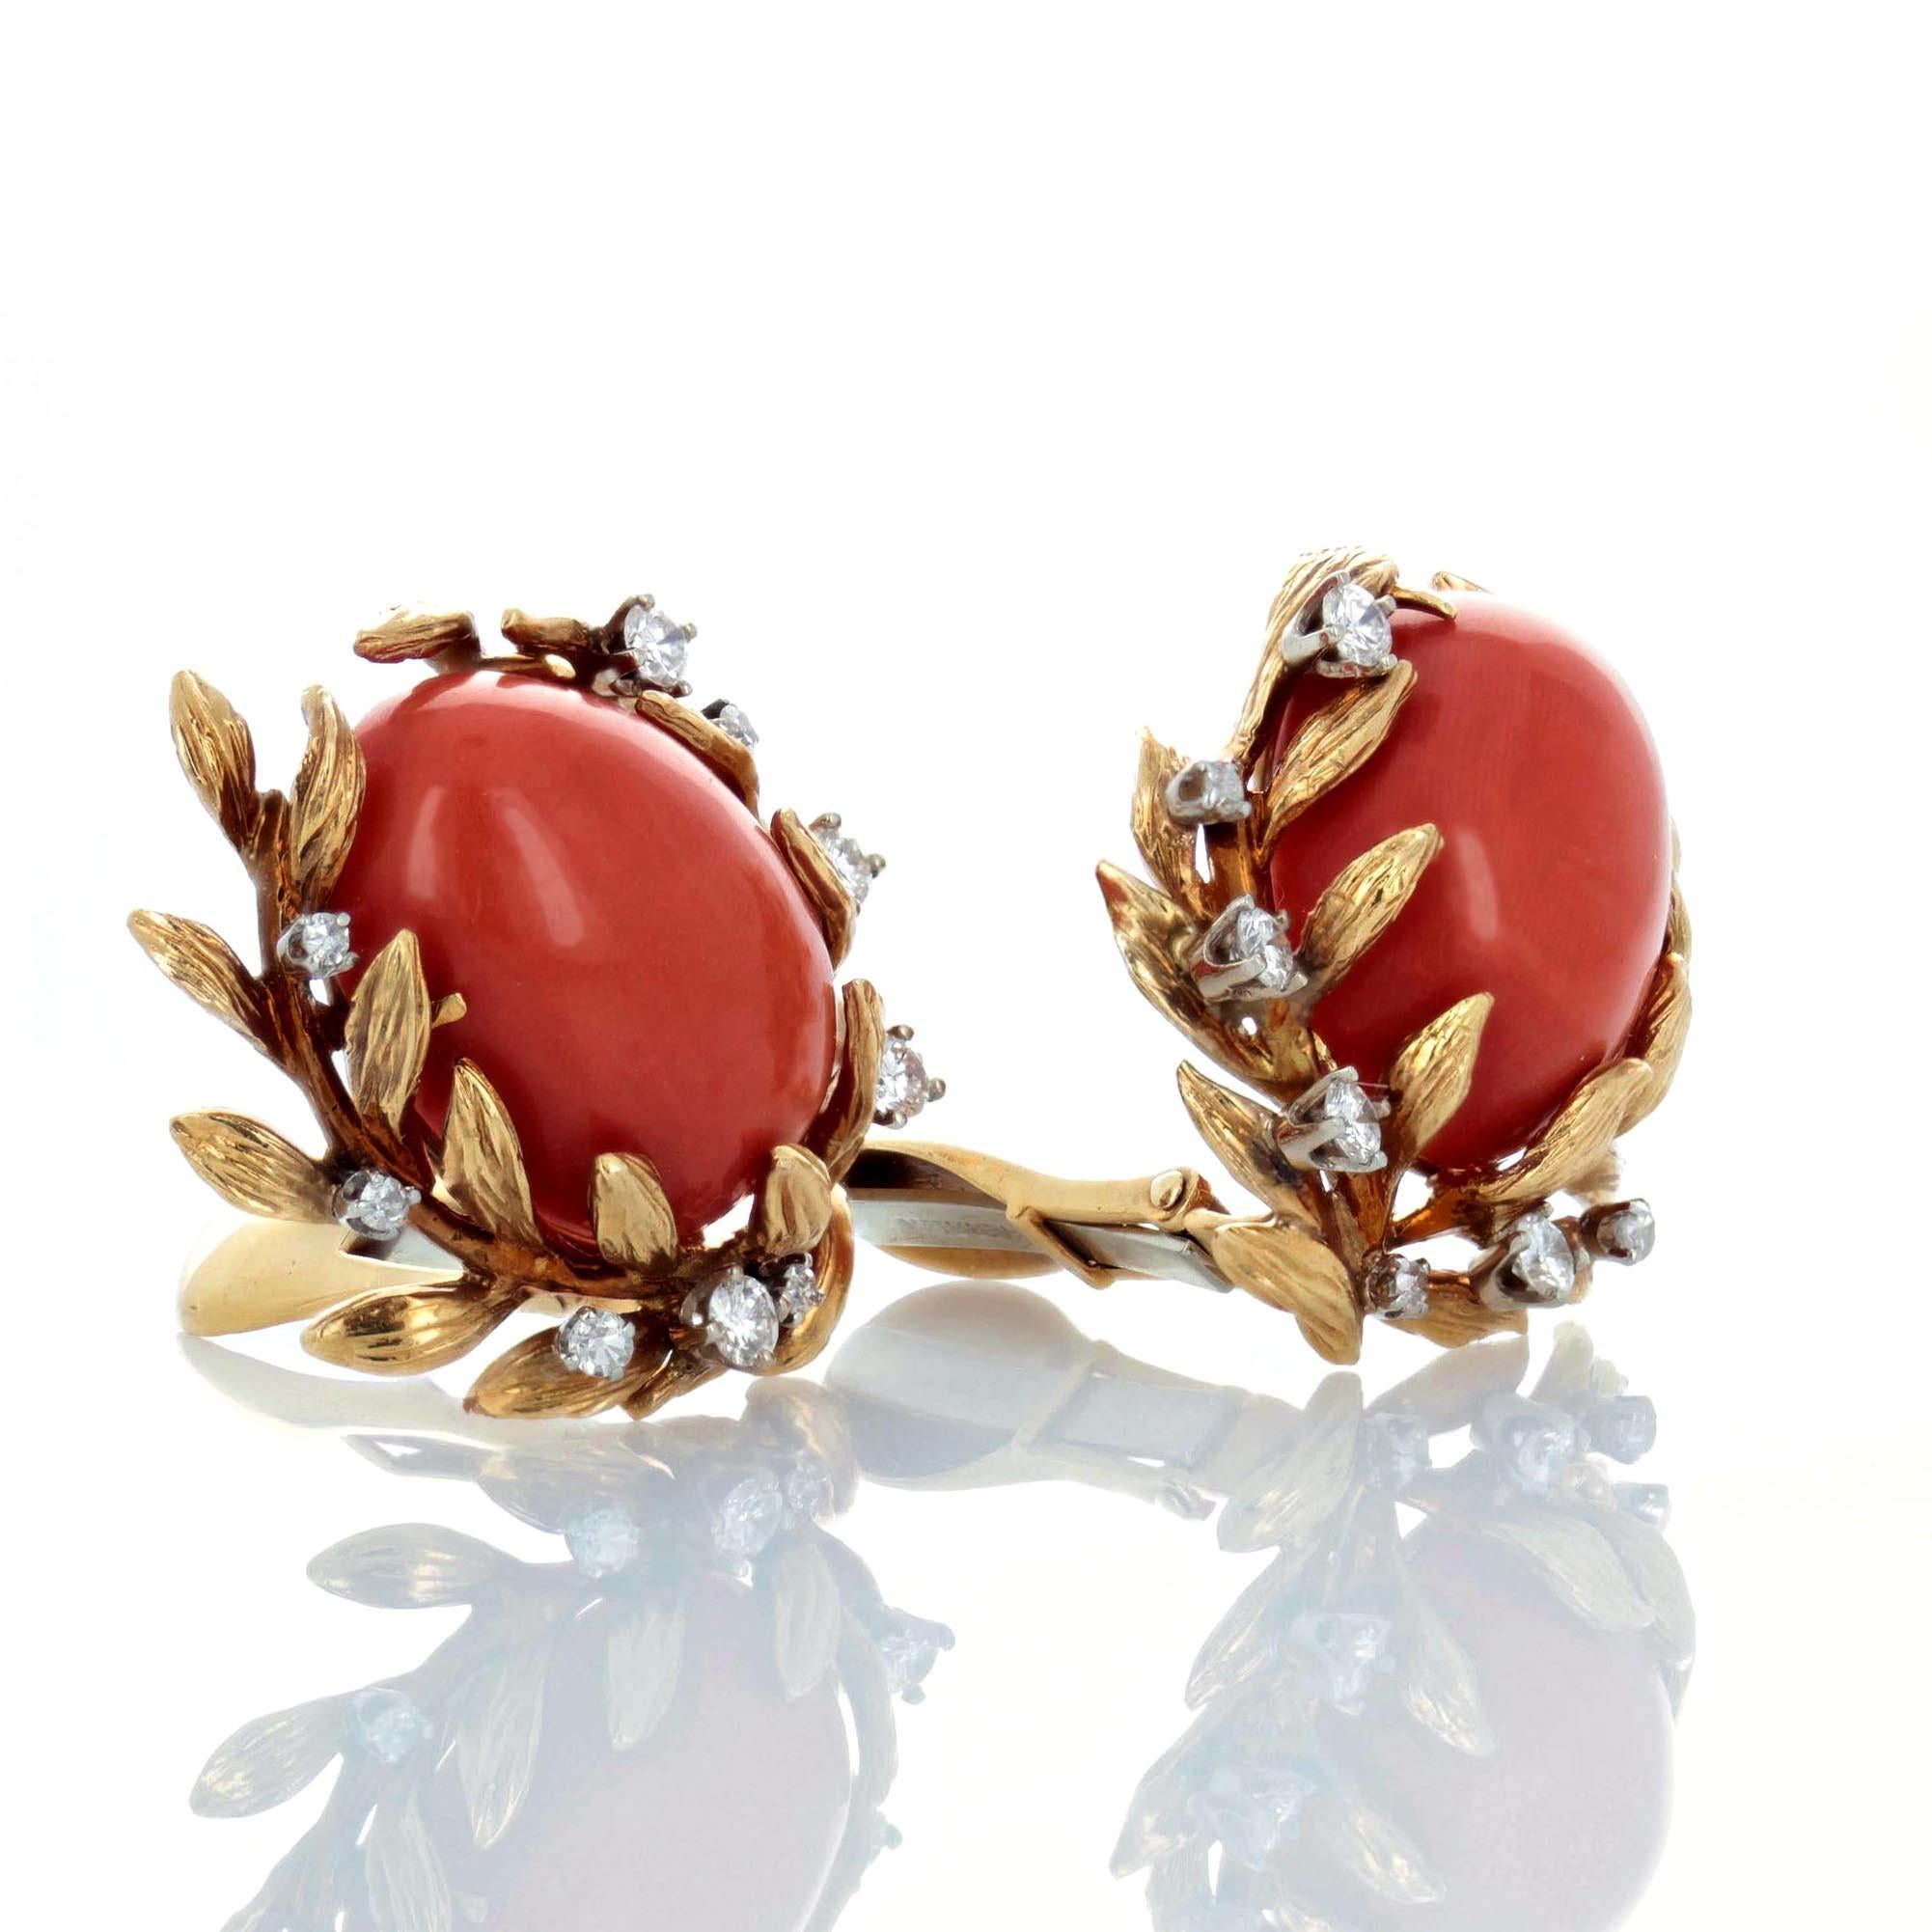 A pair of estate clip earrings centering upon oval-shaped cabochon coral, tucked into a textured 18 karat yellow gold laurel and accented with brilliant-cut diamonds. Signed Webb for David Webb. These earrings have acquired a nice patina which